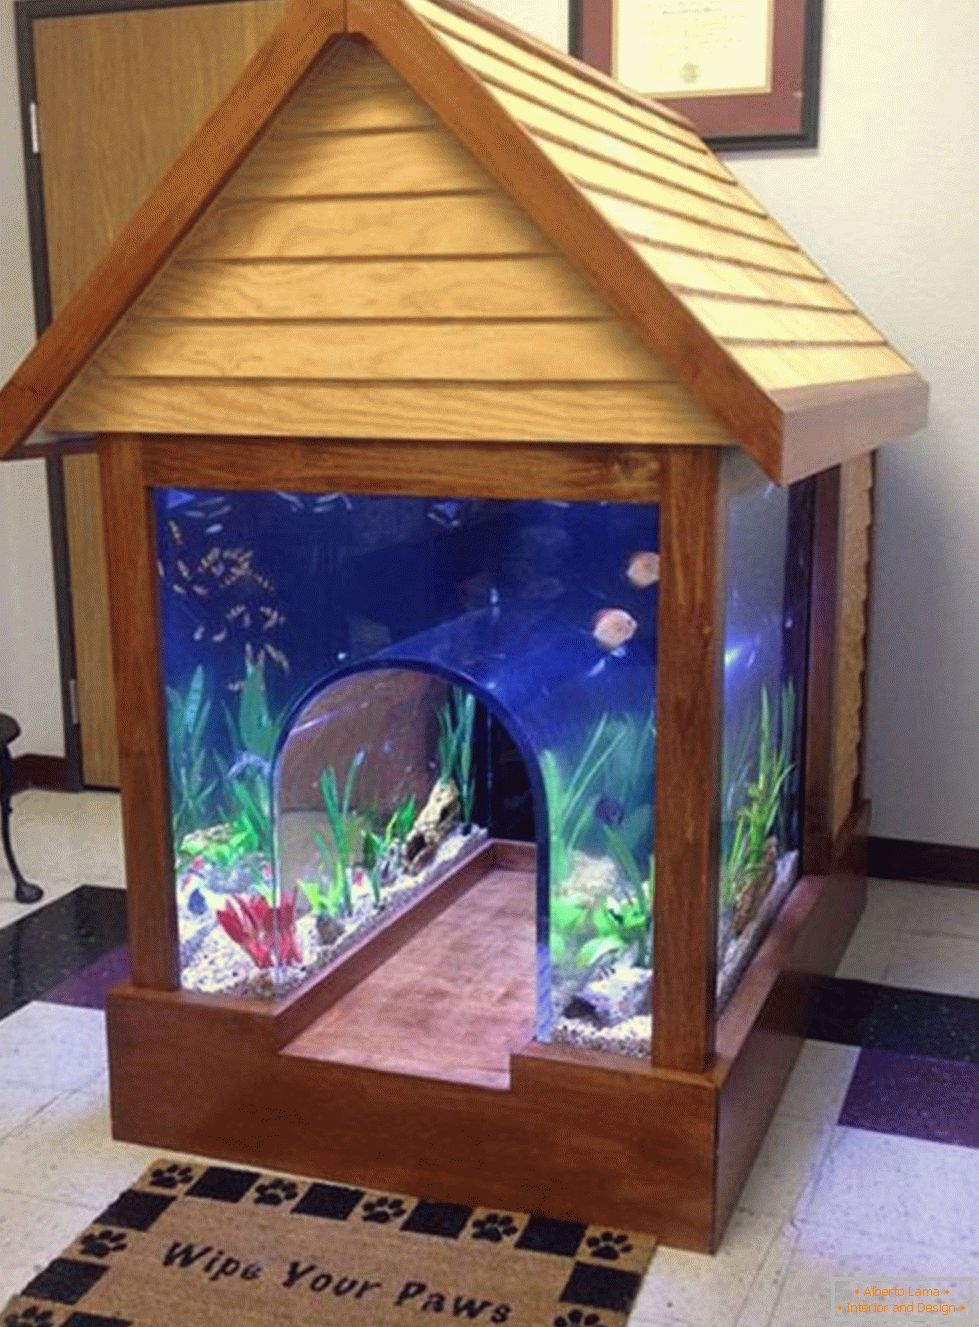 Aquarium in the form of a booth